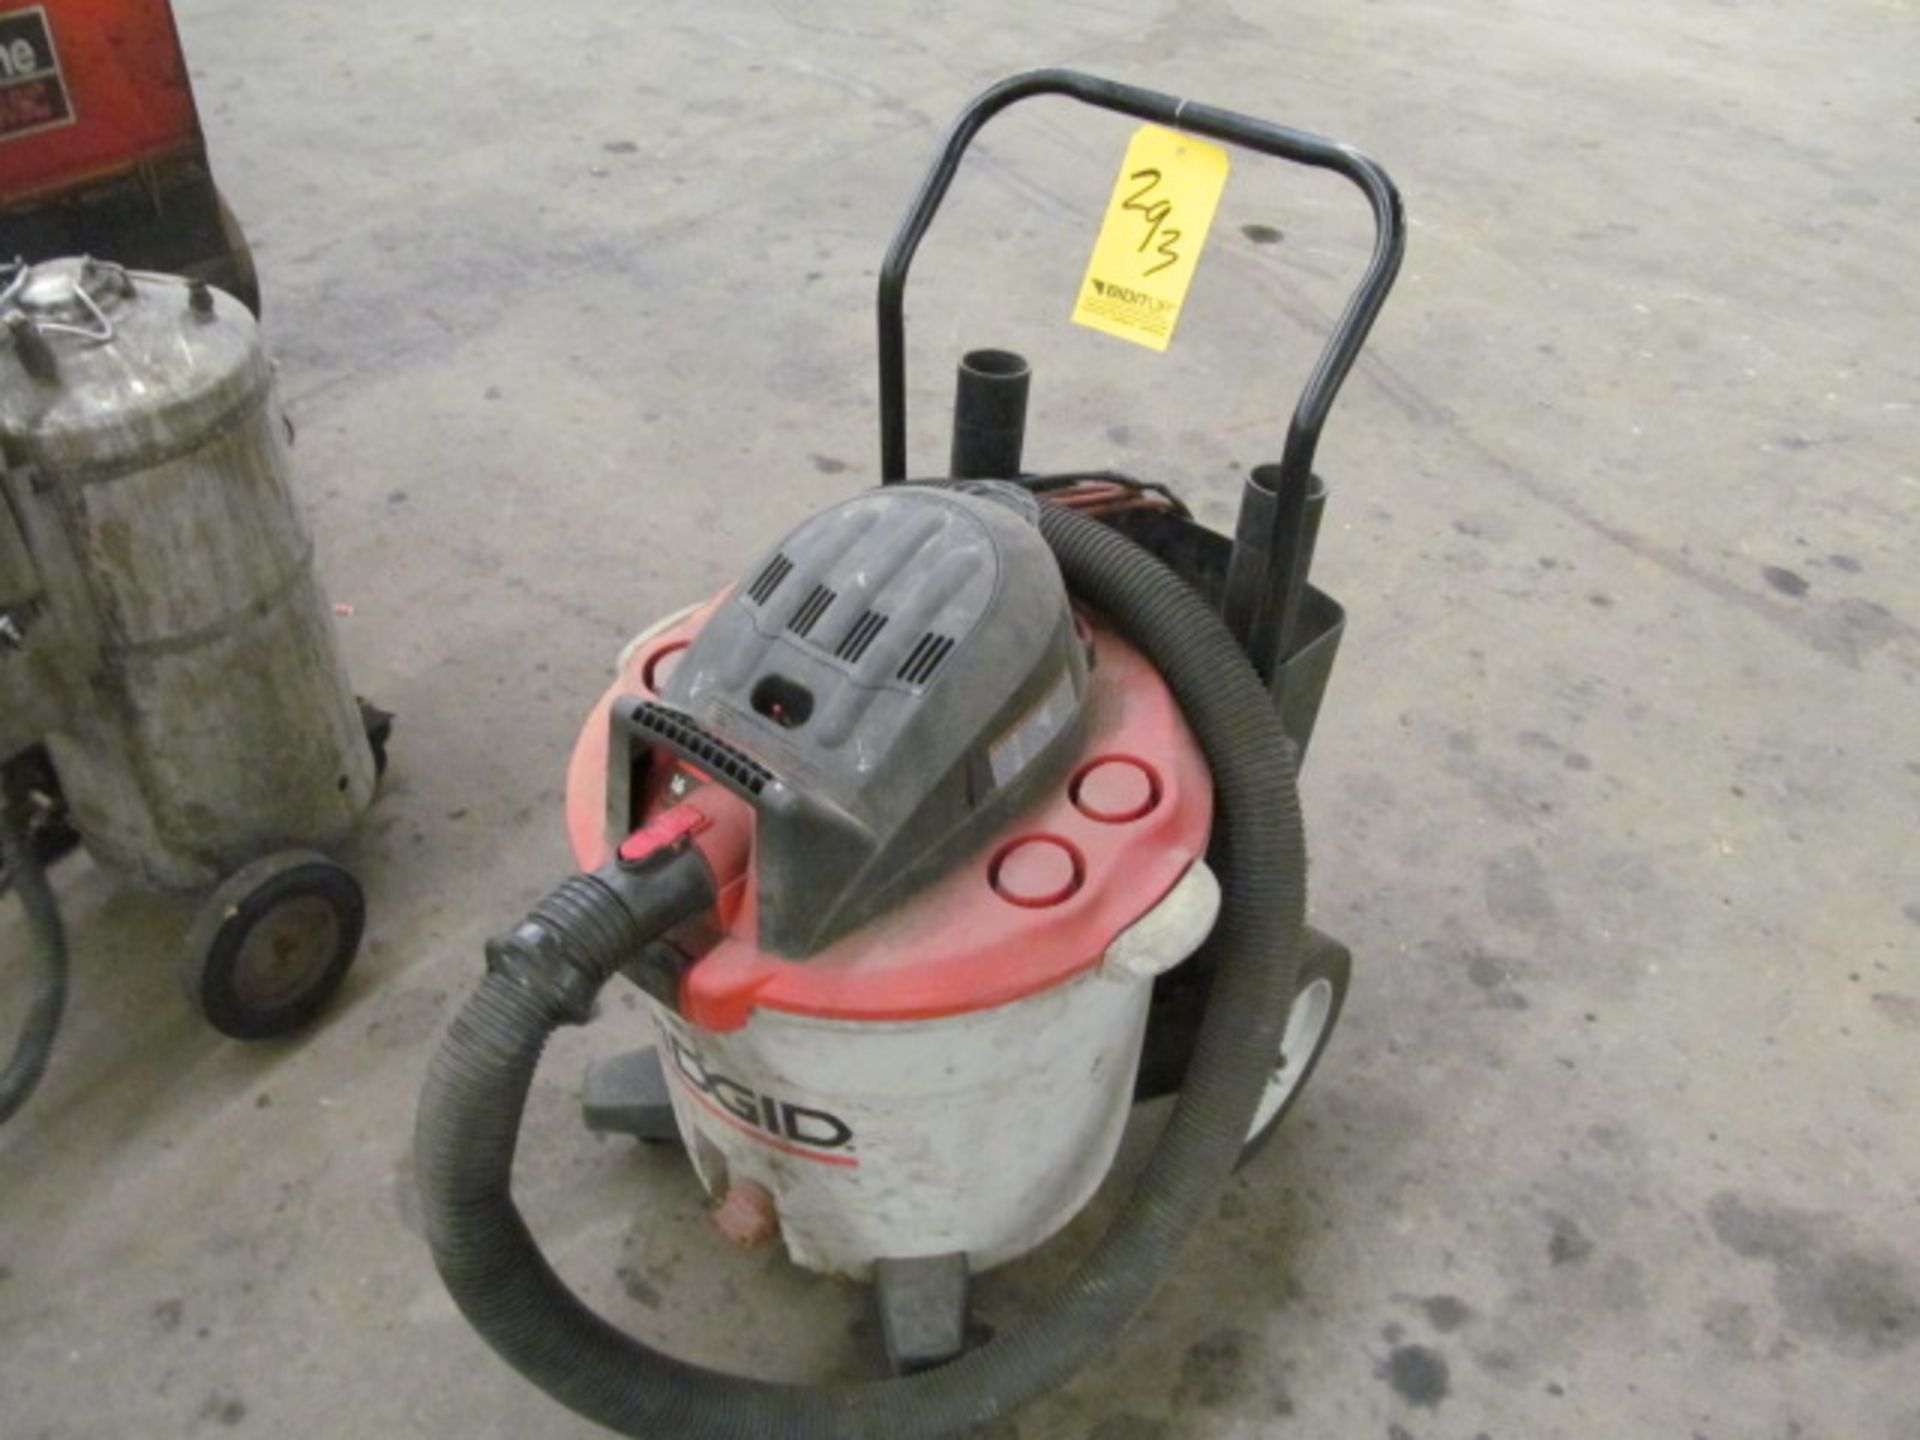 Shop VAC (Located At 207 W. Taylor St)